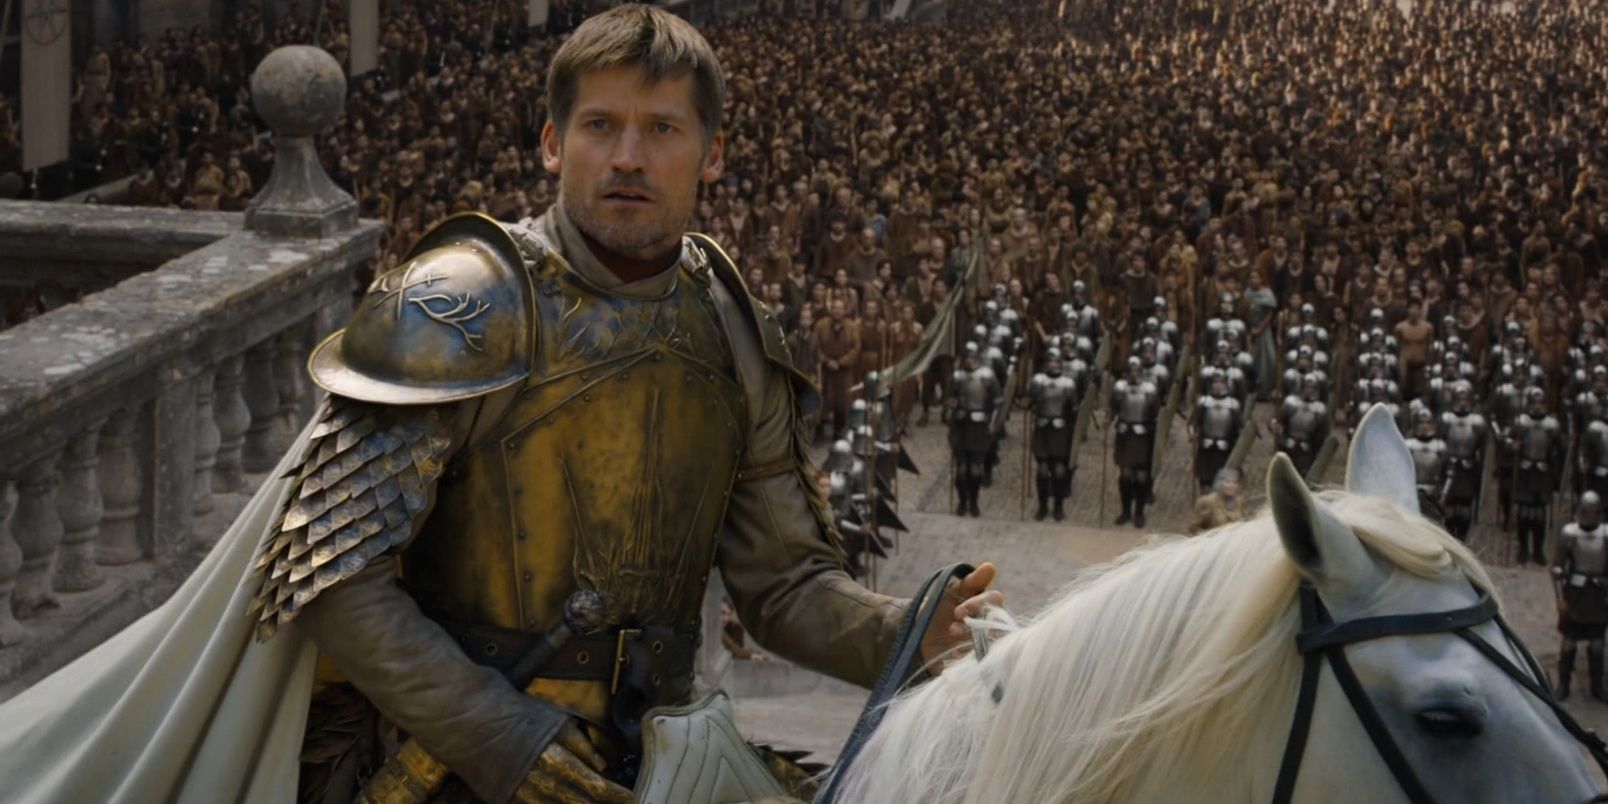 Tv And Movie News Ranking Every Episode Of Game Of Thrones Season